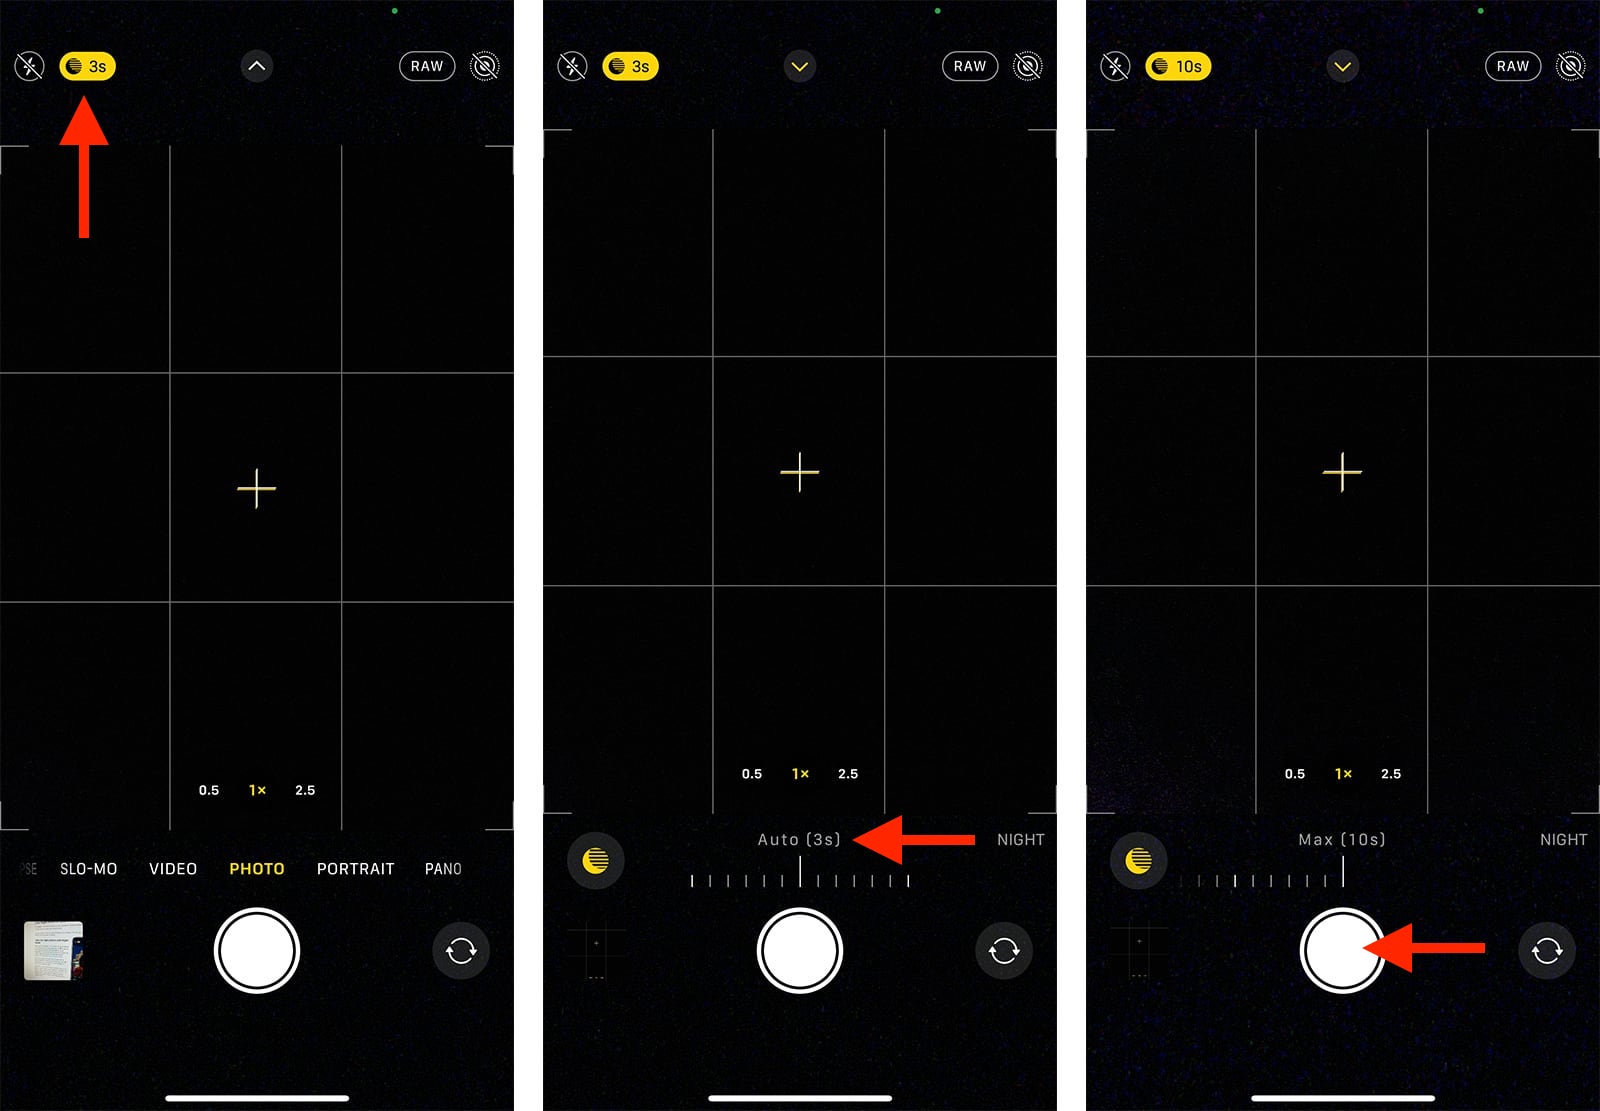 How to Use Night Mode on iPhone 13, Mini, Pro, and Pro Max - TechNadu